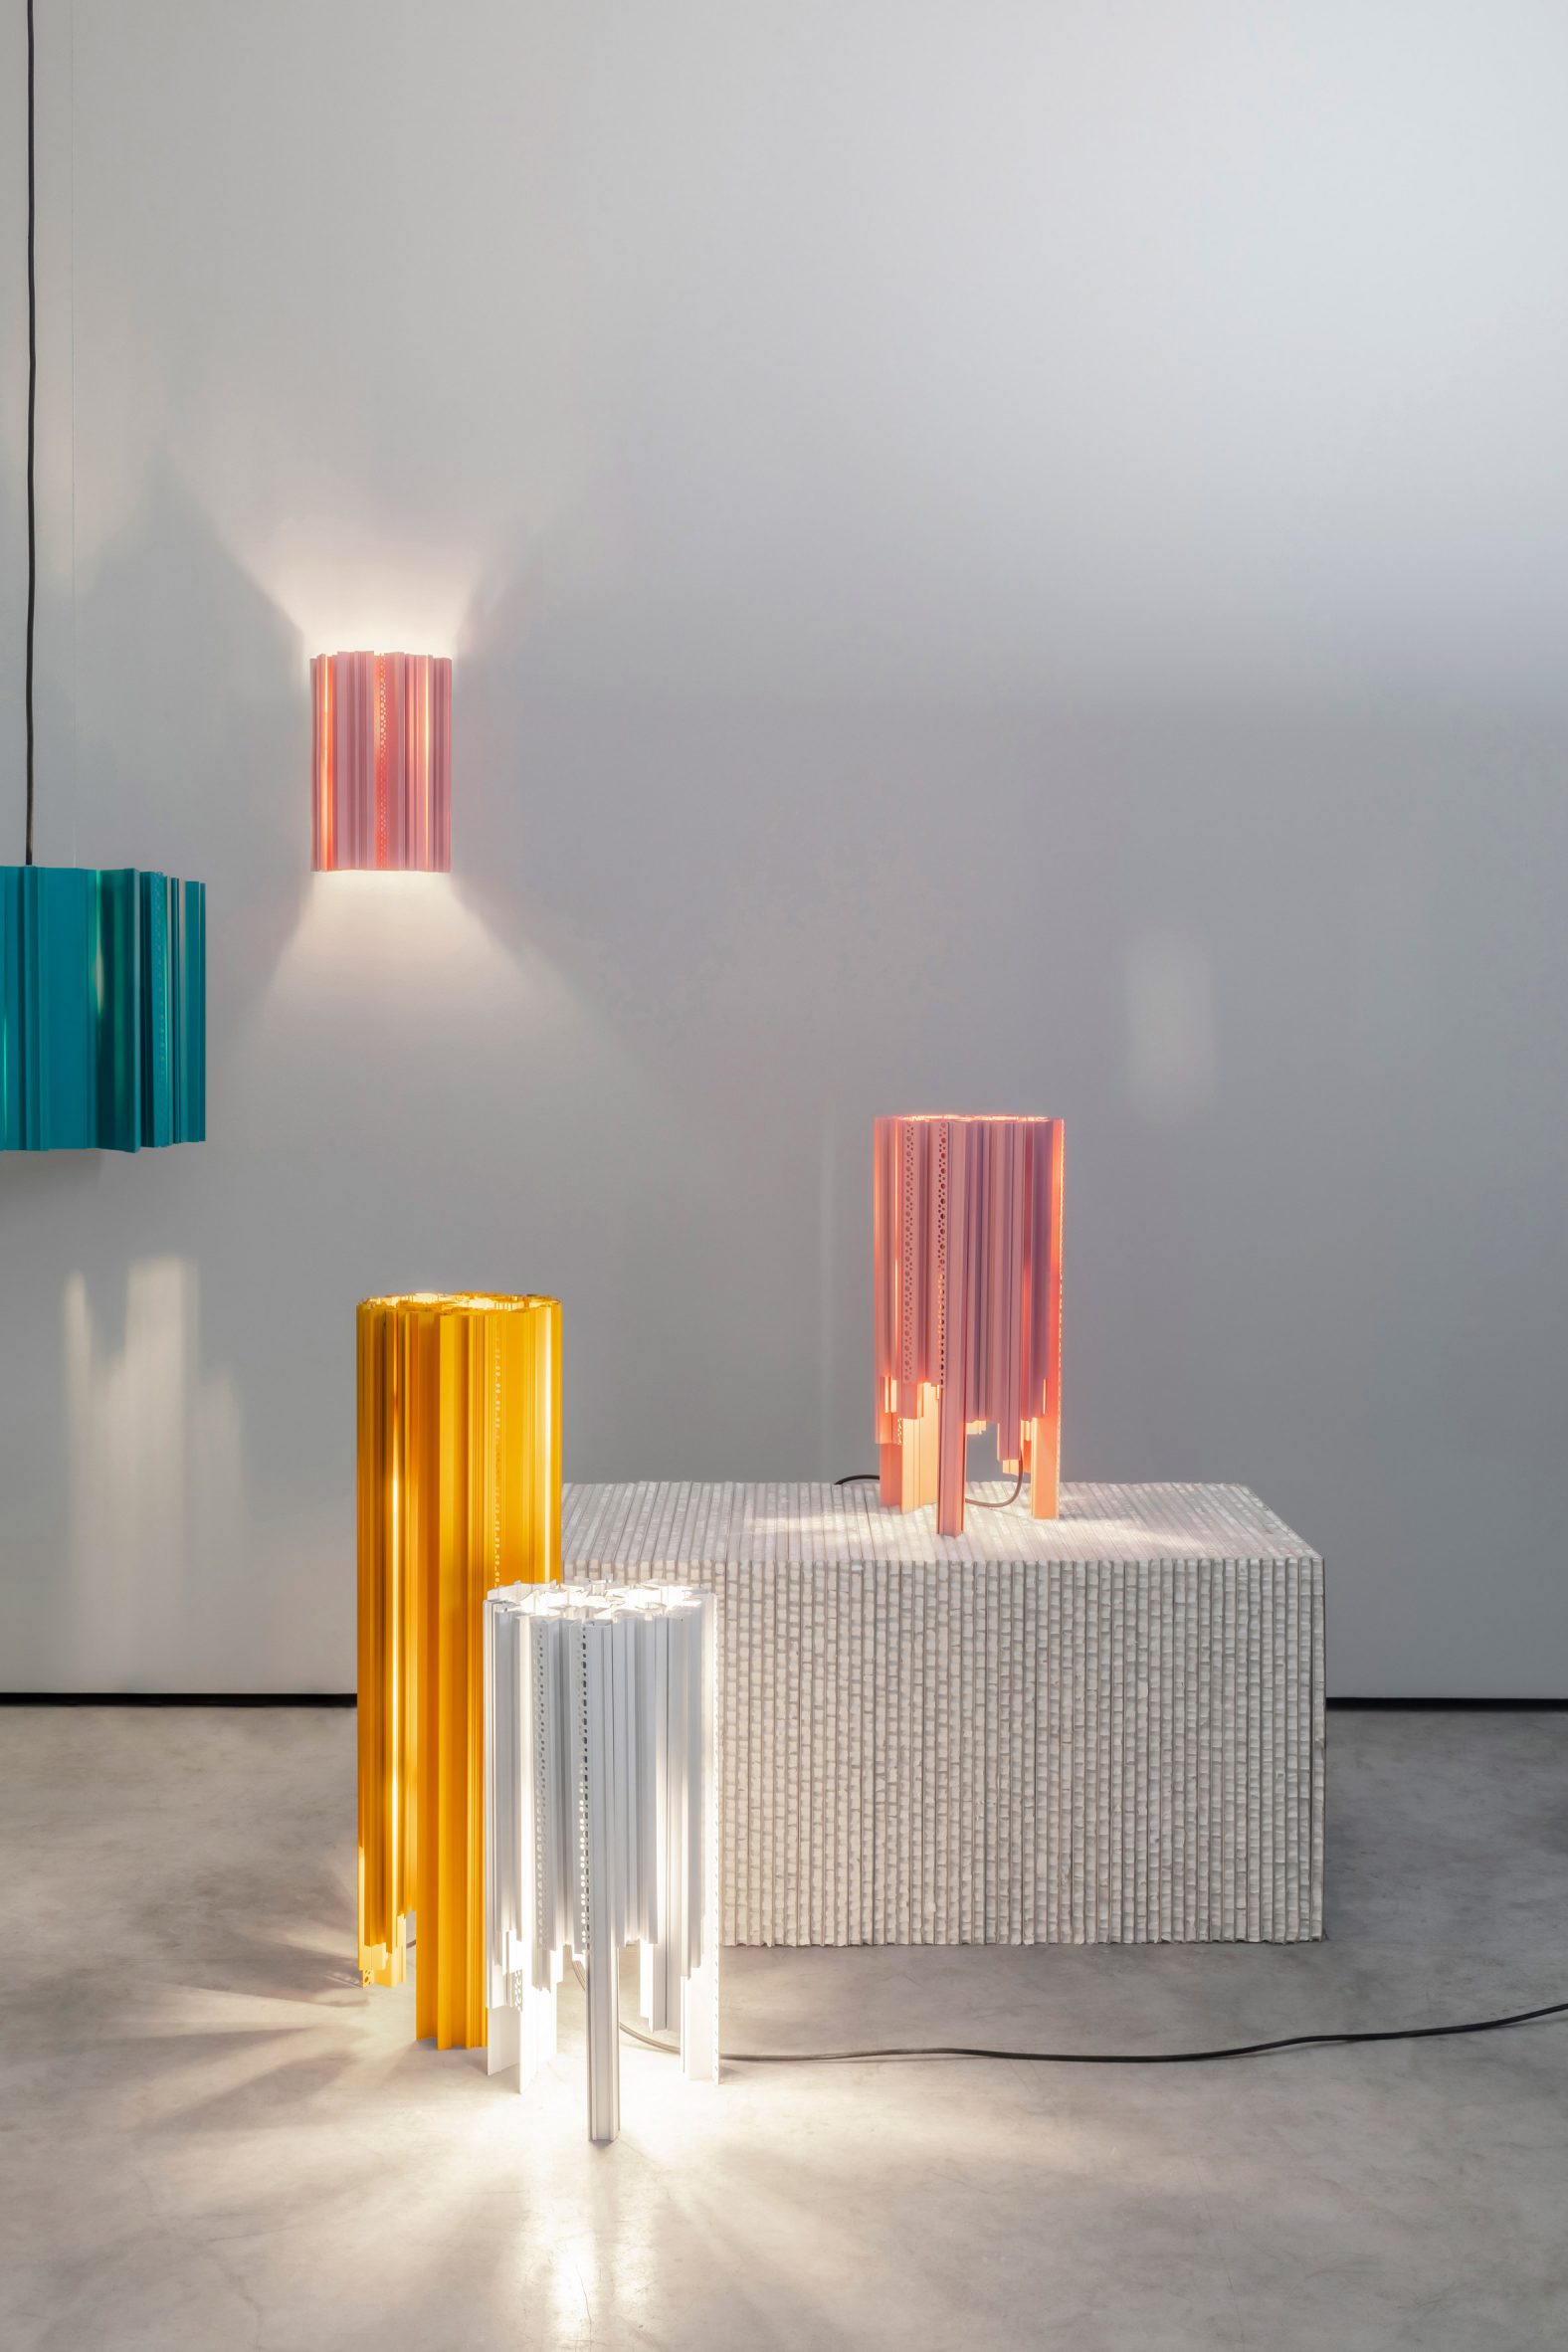 Blue, pink, yellow and white High Profile lights by MVRDV and Delta Light